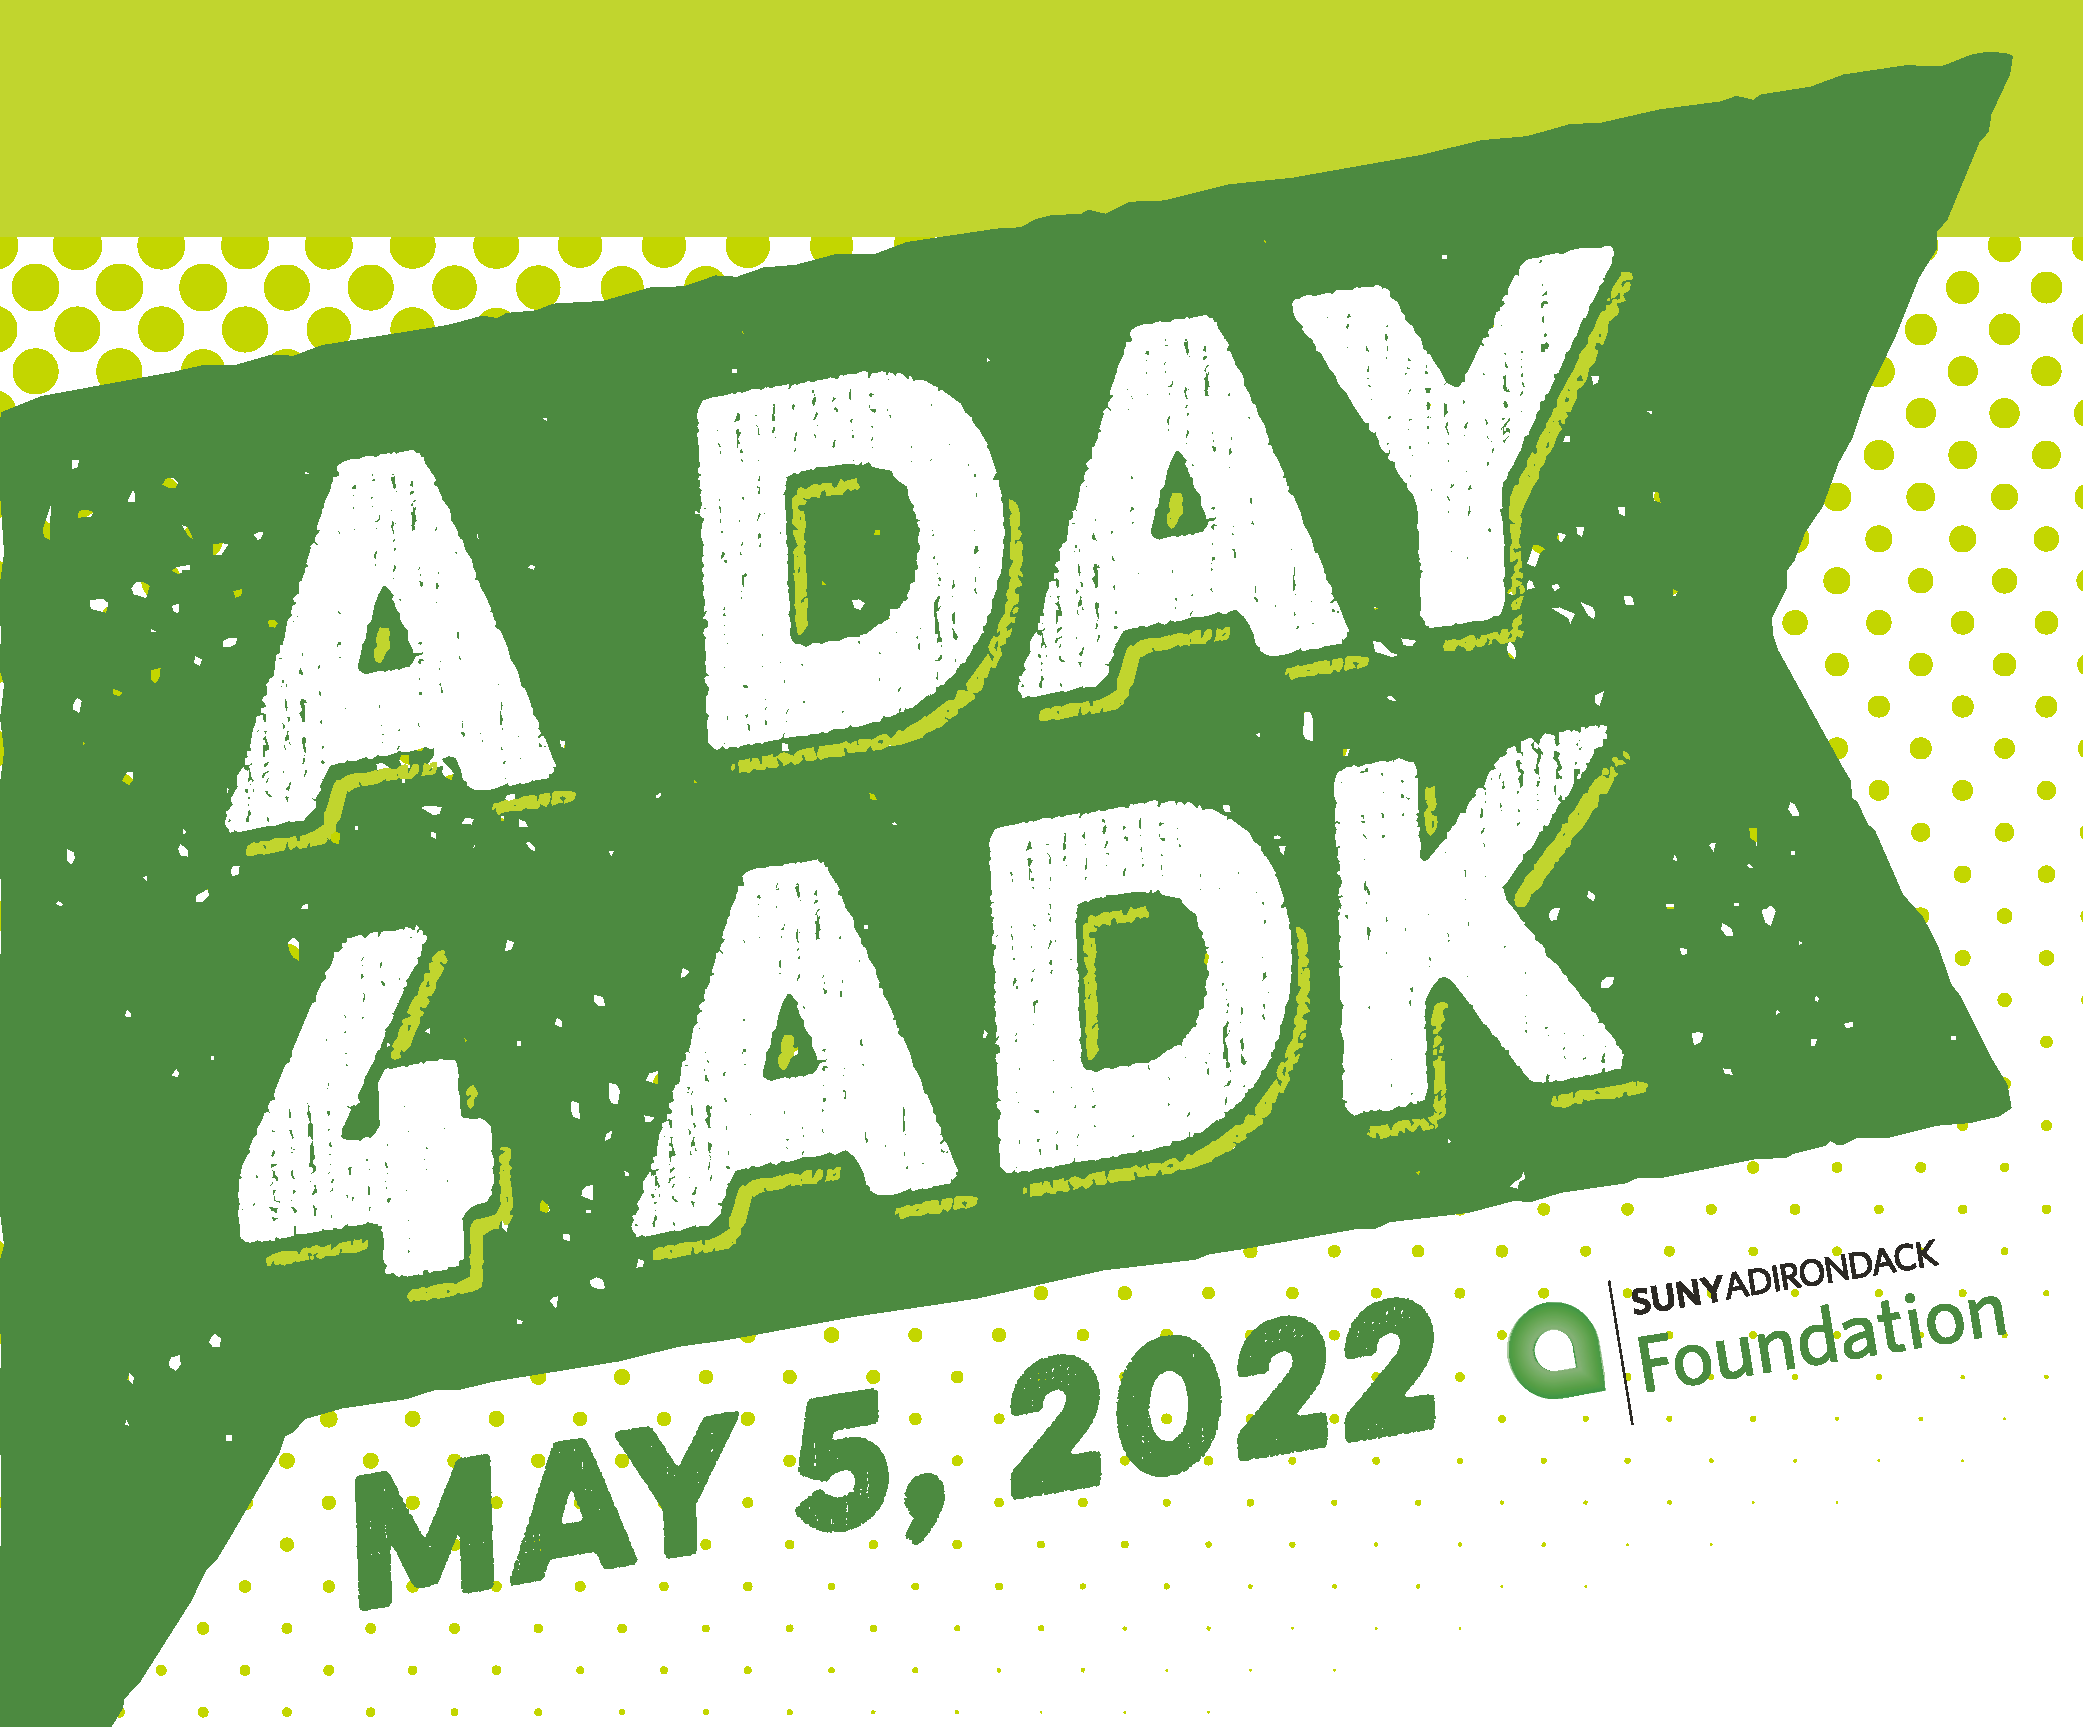 A Day 4 ADK — May 5, 2022